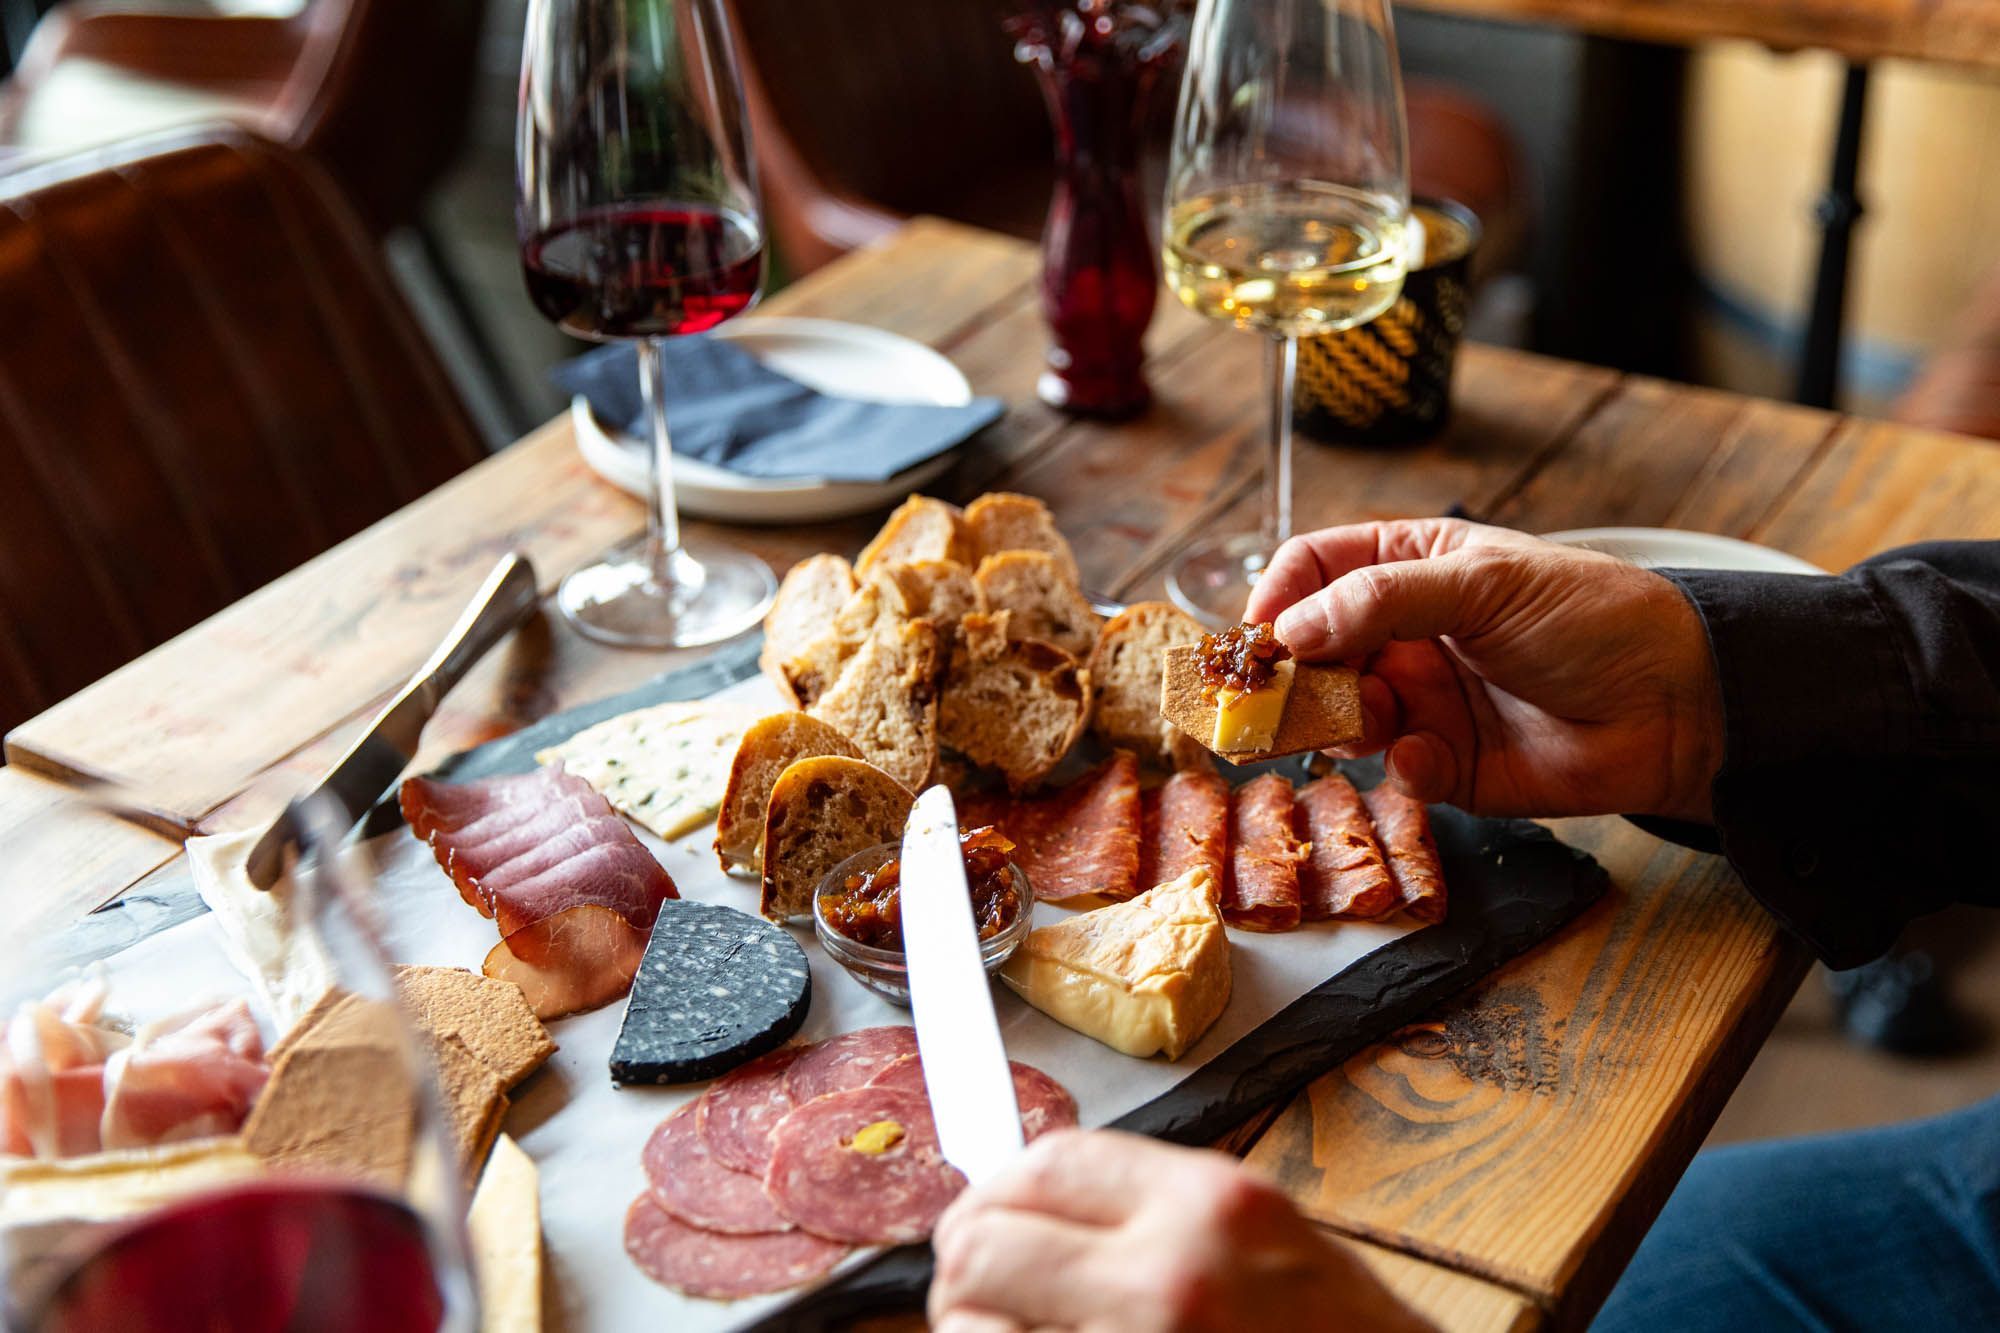 person spreading chutney on bread with piece of cheese, charcuterie board next to it and glass of both red and white wine